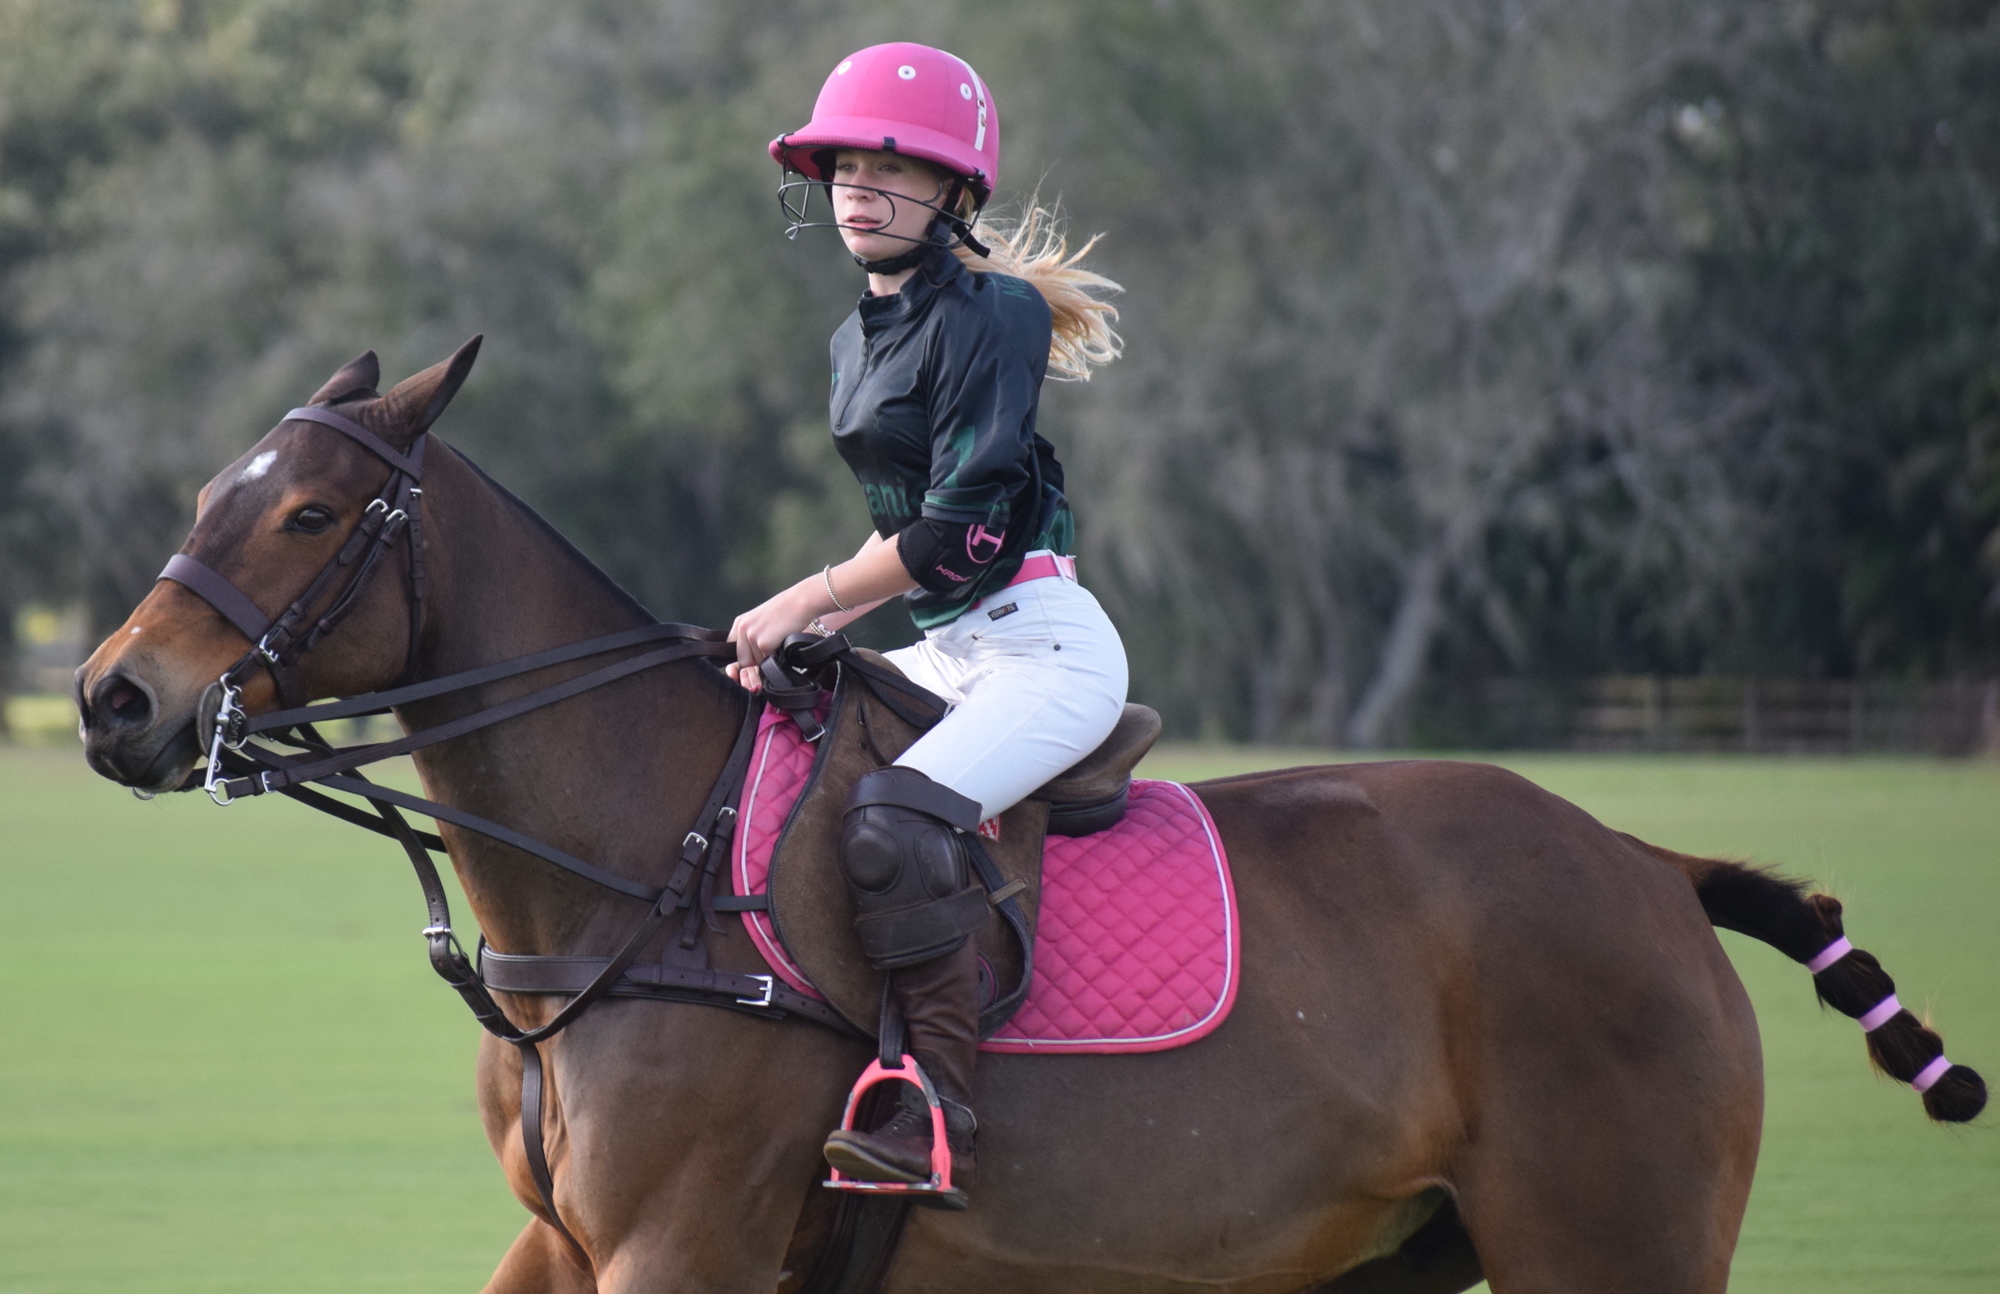 Playing polo could lead to a college career for 13-year-old Hanna Hornung if she continues to play well.